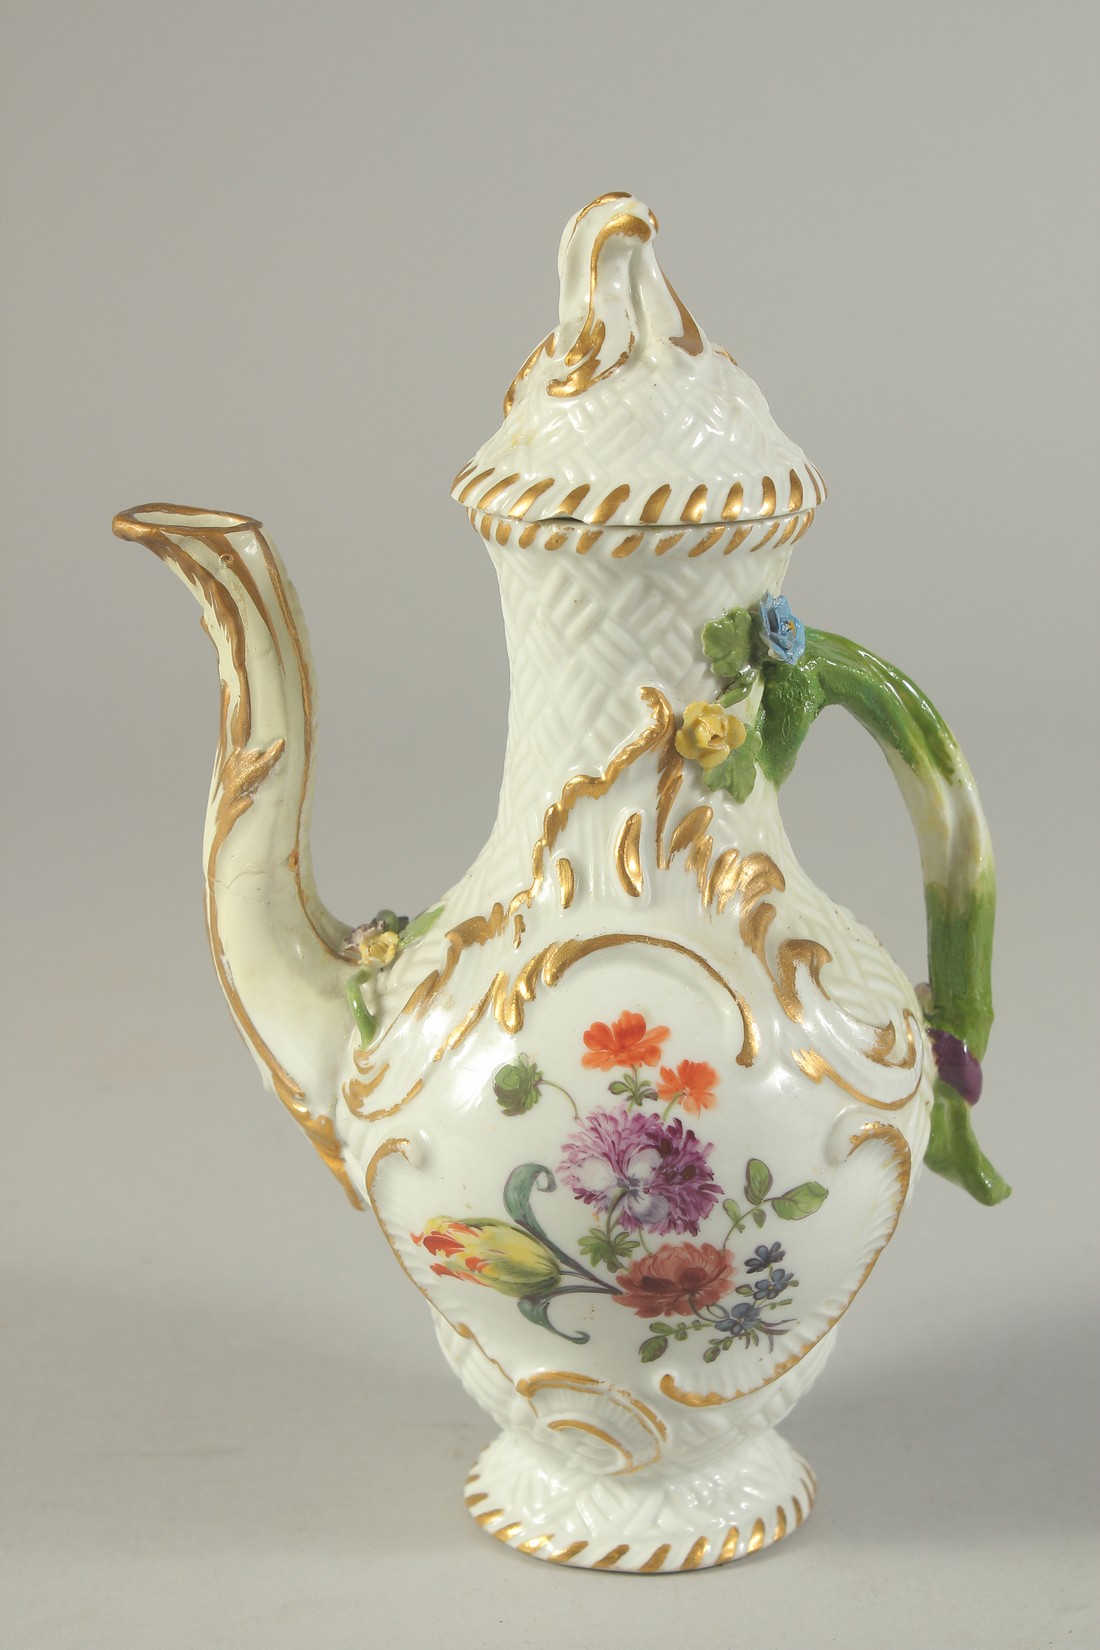 A SMALL MEISSEN PORCELAIN JUG AND COVER painted with flowers. Cross swords mark in blue. 6.5ins high